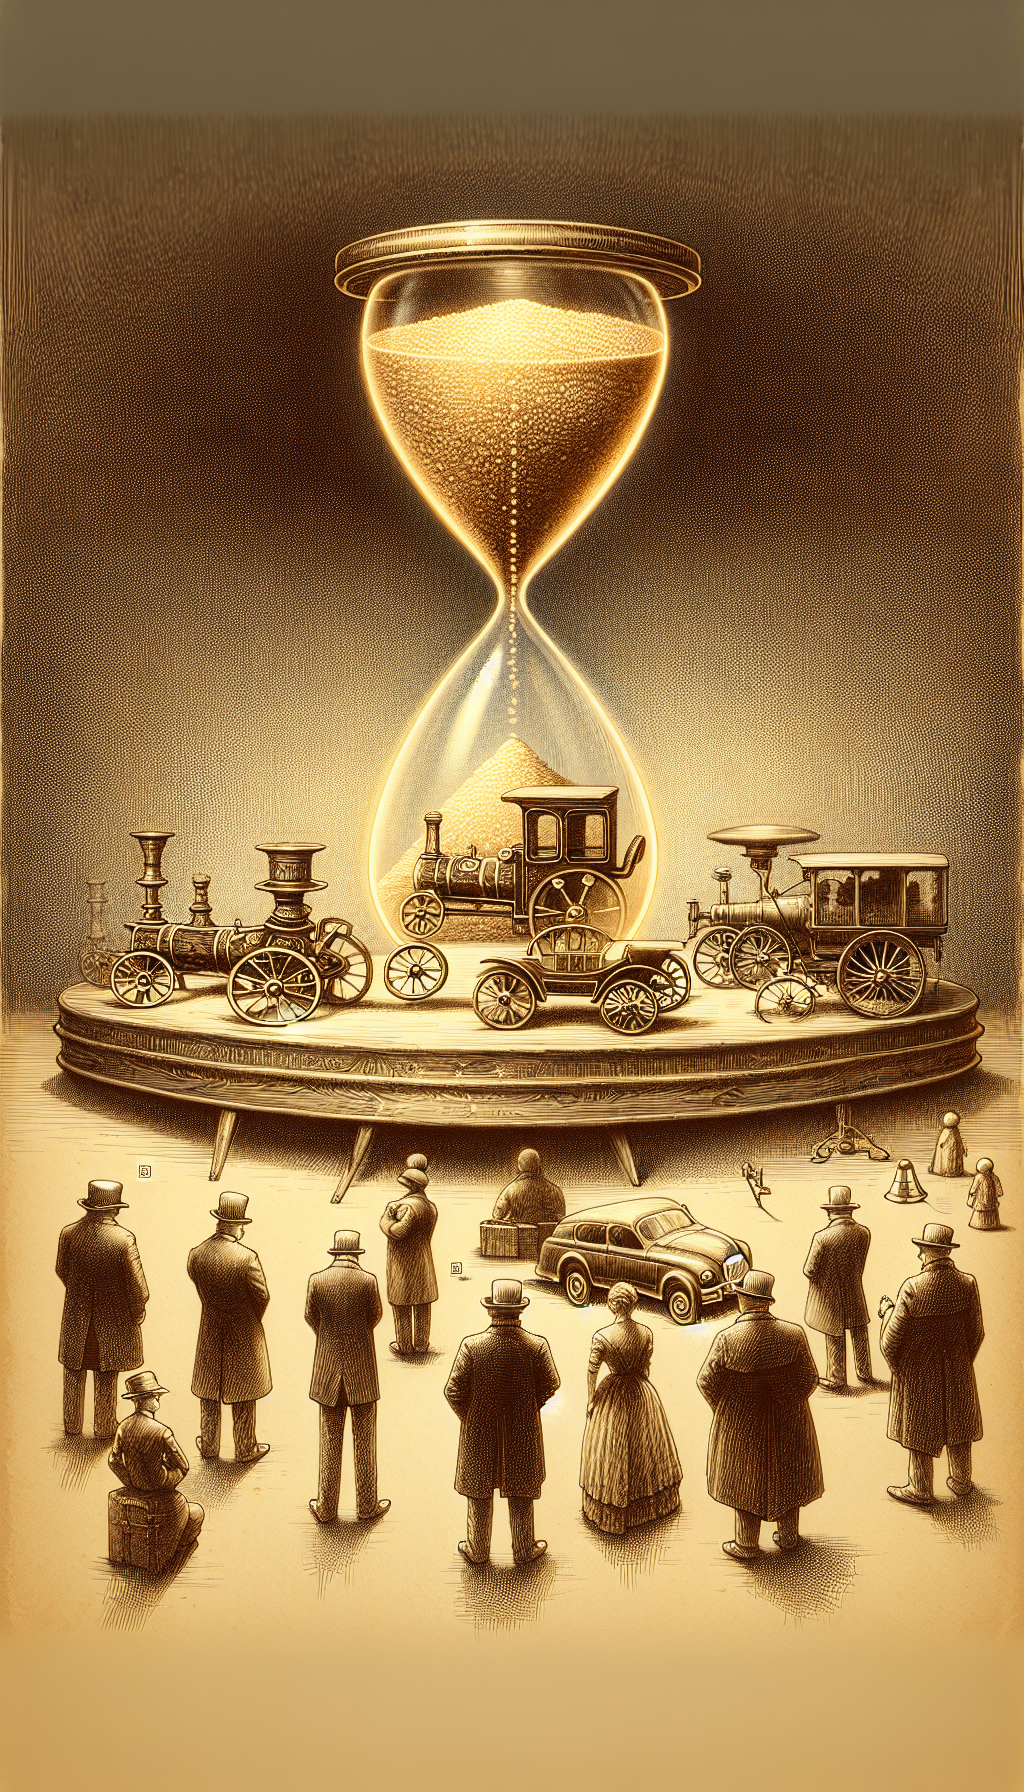 A sepia-toned sketch depicts a vintage auction pedestal, with an array of pristine cast iron toys - a horse-drawn carriage, a classic car, and a steam engine train - each haloed by shimmering price tags that sport escalating values. Overhead, a translucent, ornate hourglass gently spills a golden sand that morphs into a crowd of avid collectors bidding enthusiastically below.